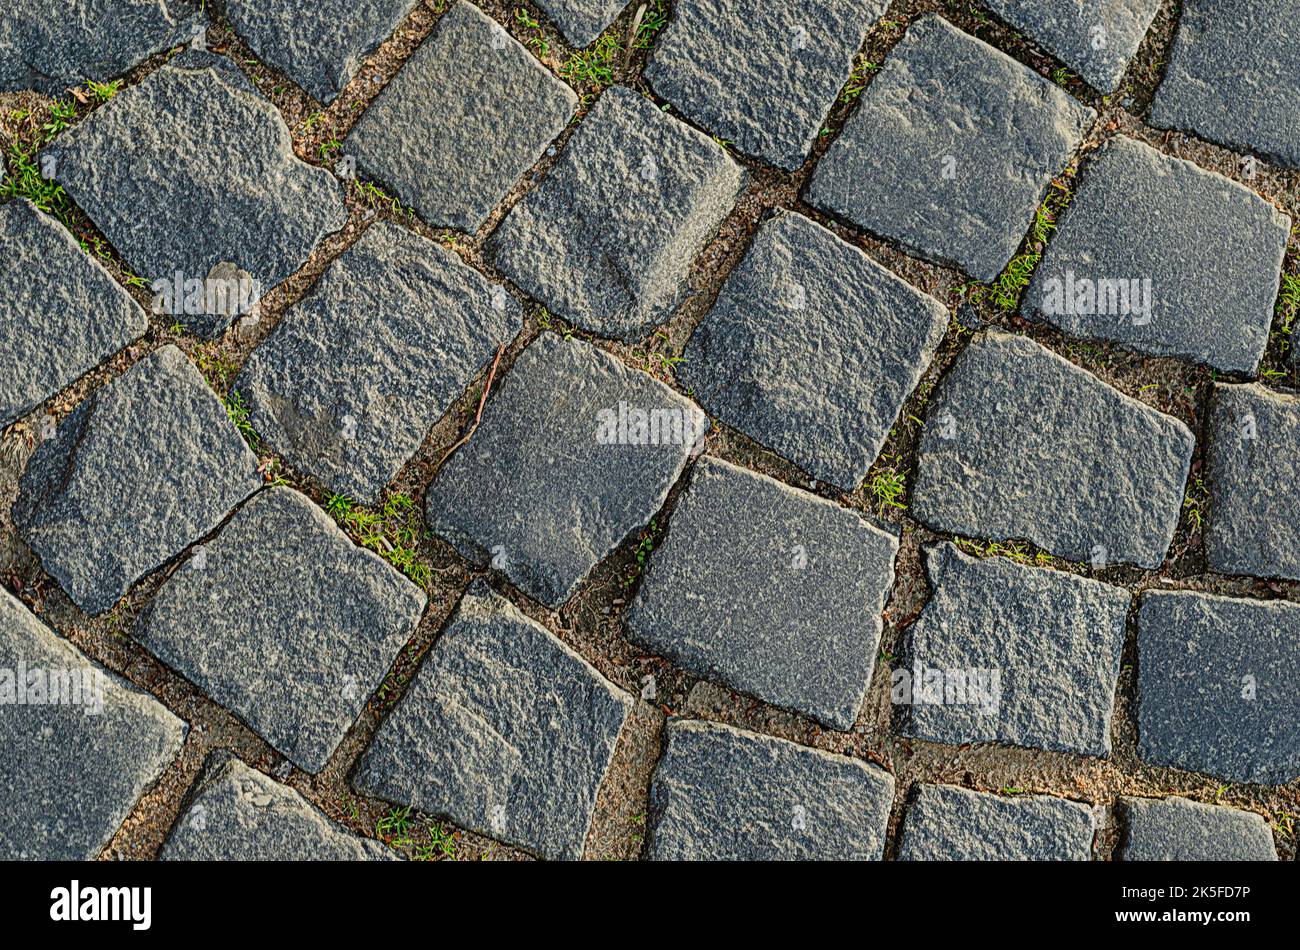 Abstract background of old cobblestone pavement Stock Photo